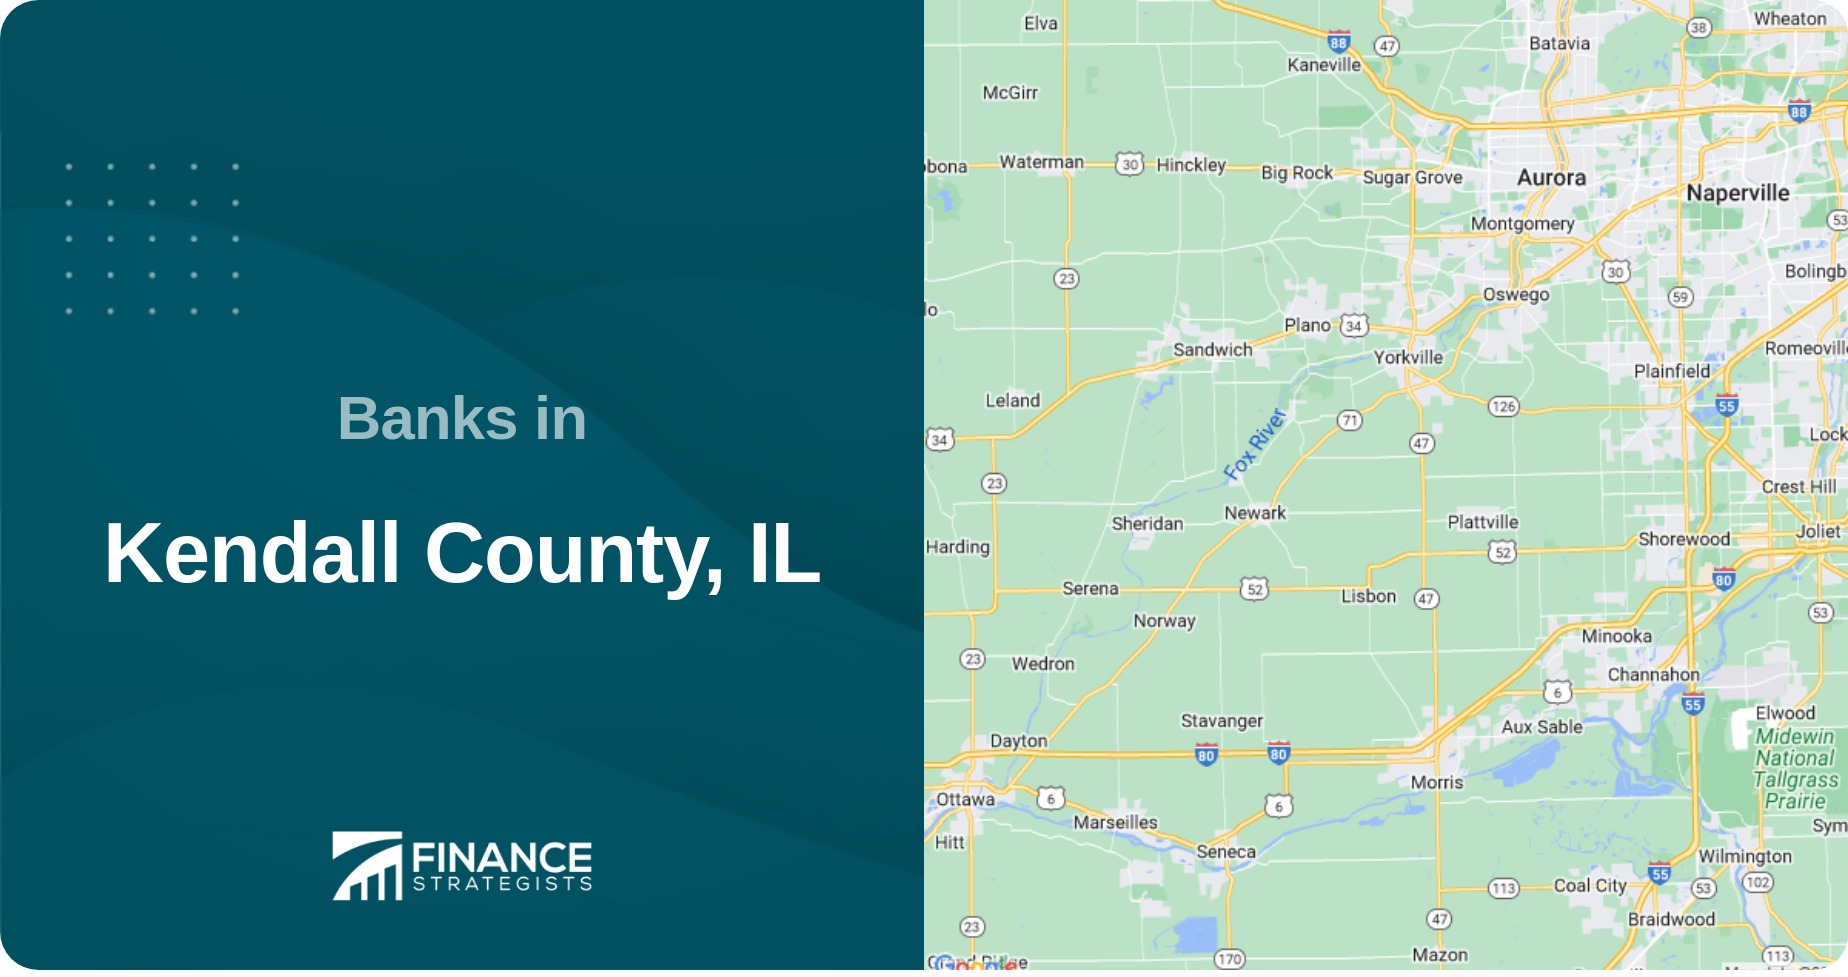 Banks in Kendall County, IL